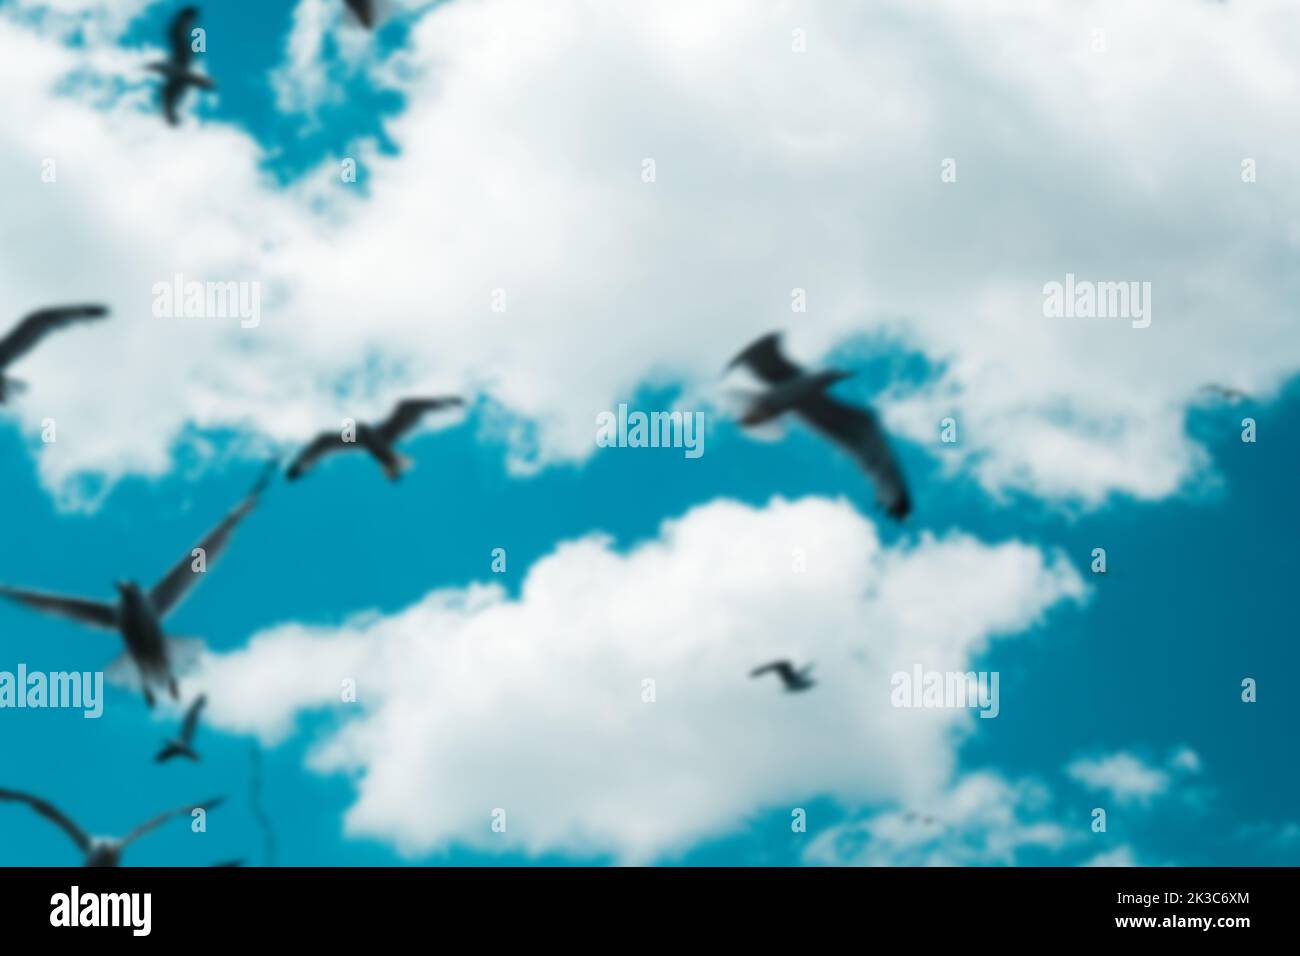 Blue and cloudy sky with seagulls blurred background, beautiful blue landscape with birds flying around, many seagulls air, clear and bright blur sky Stock Photo